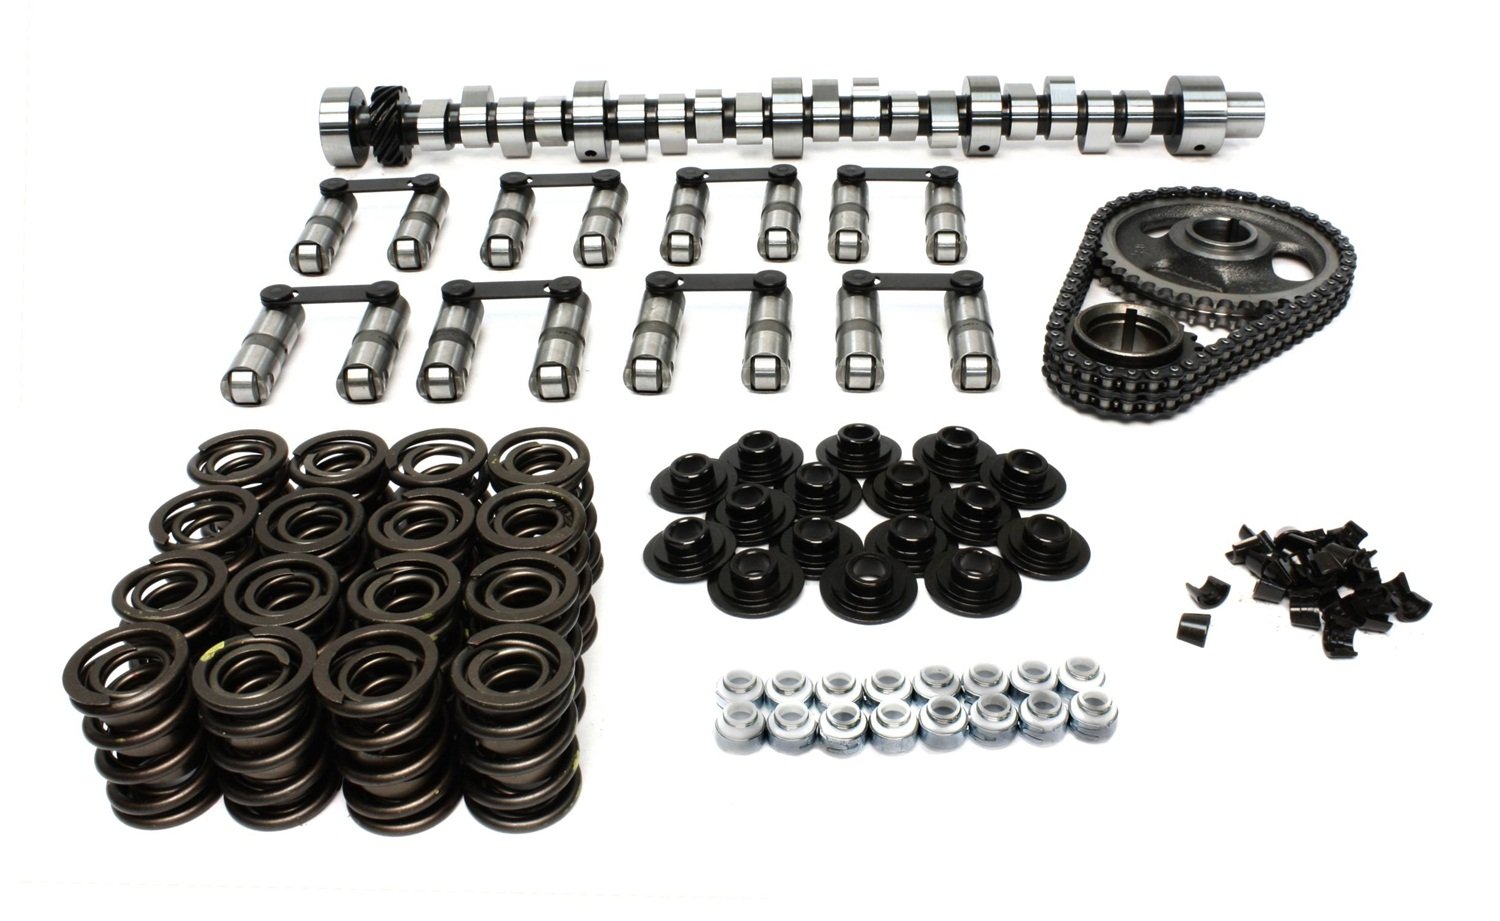 Big Mutha Thumpr Retro-Fit Hydraulic Roller Camshaft Complete Kit Lift: .532"/.519"